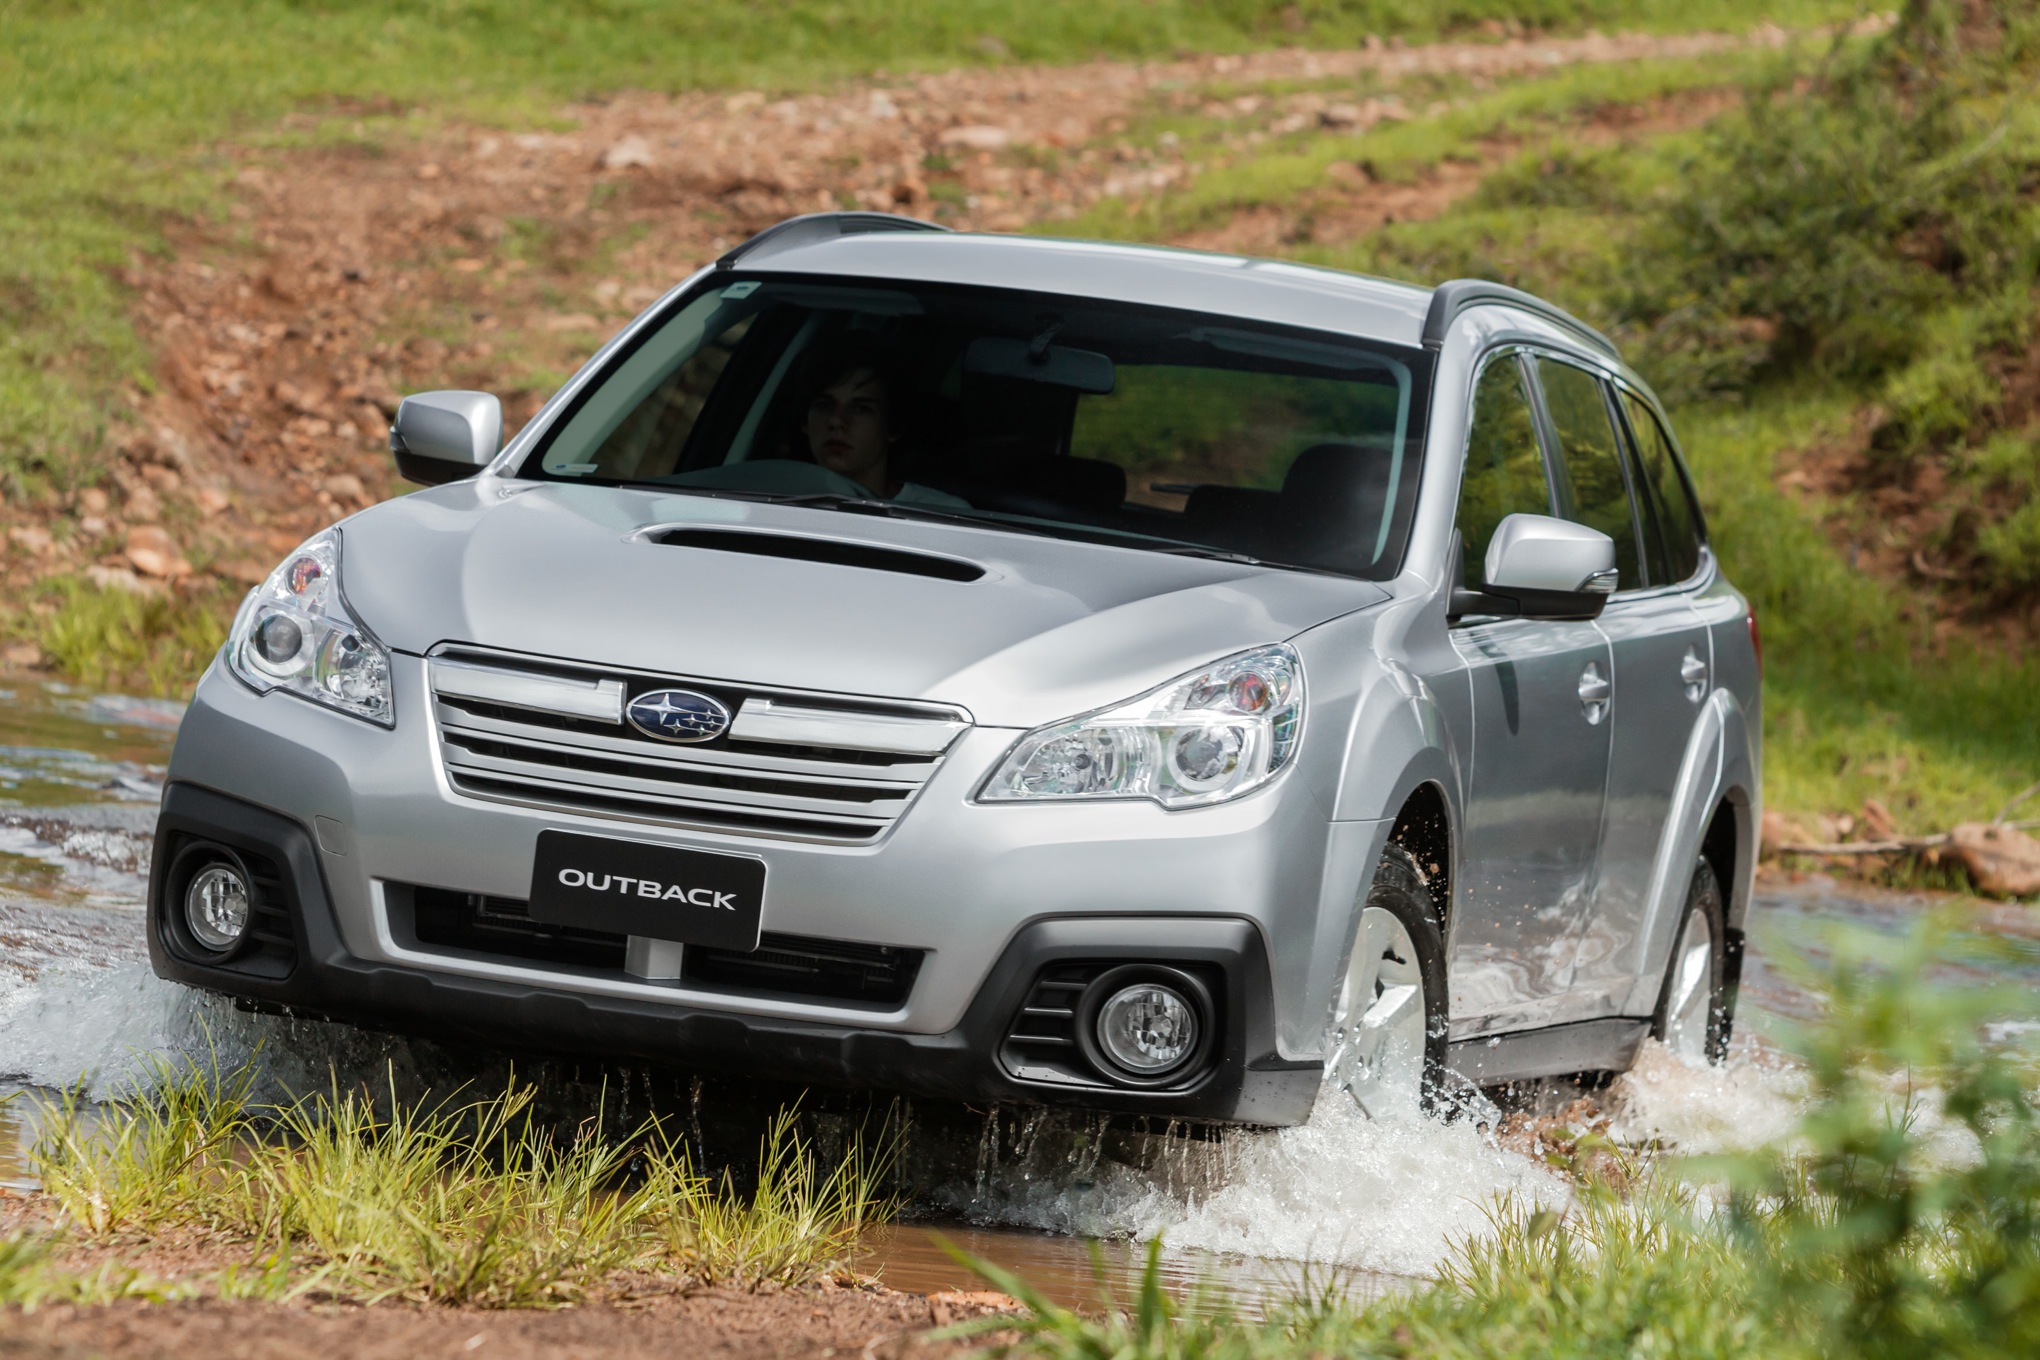 Subaru Outback Diesel Automatic Review CarAdvice